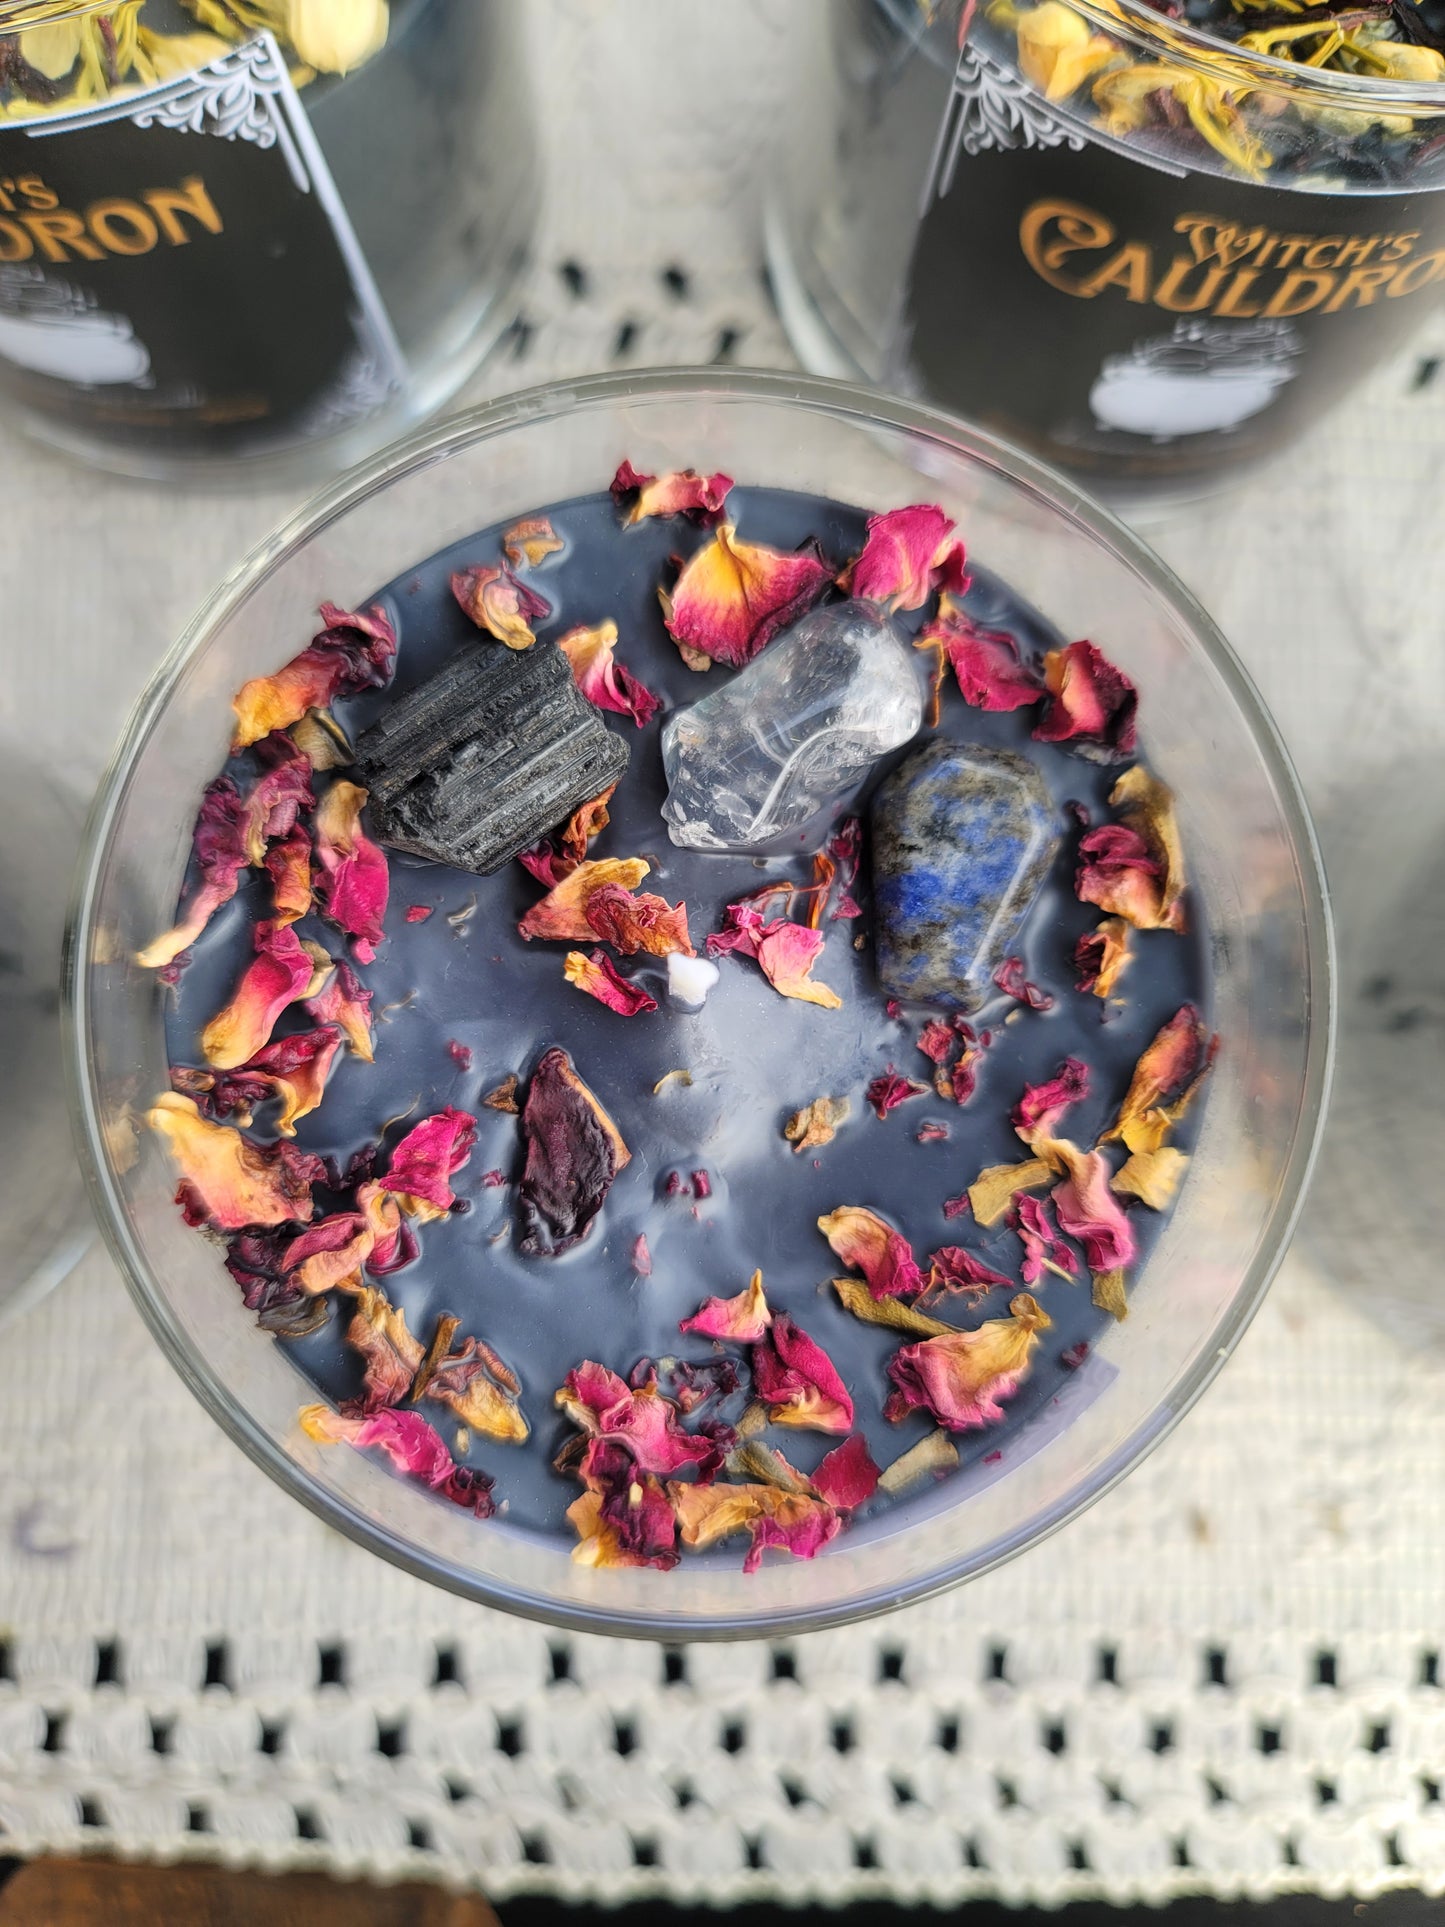 Witch's Cauldron Shimmering Crystal Candle